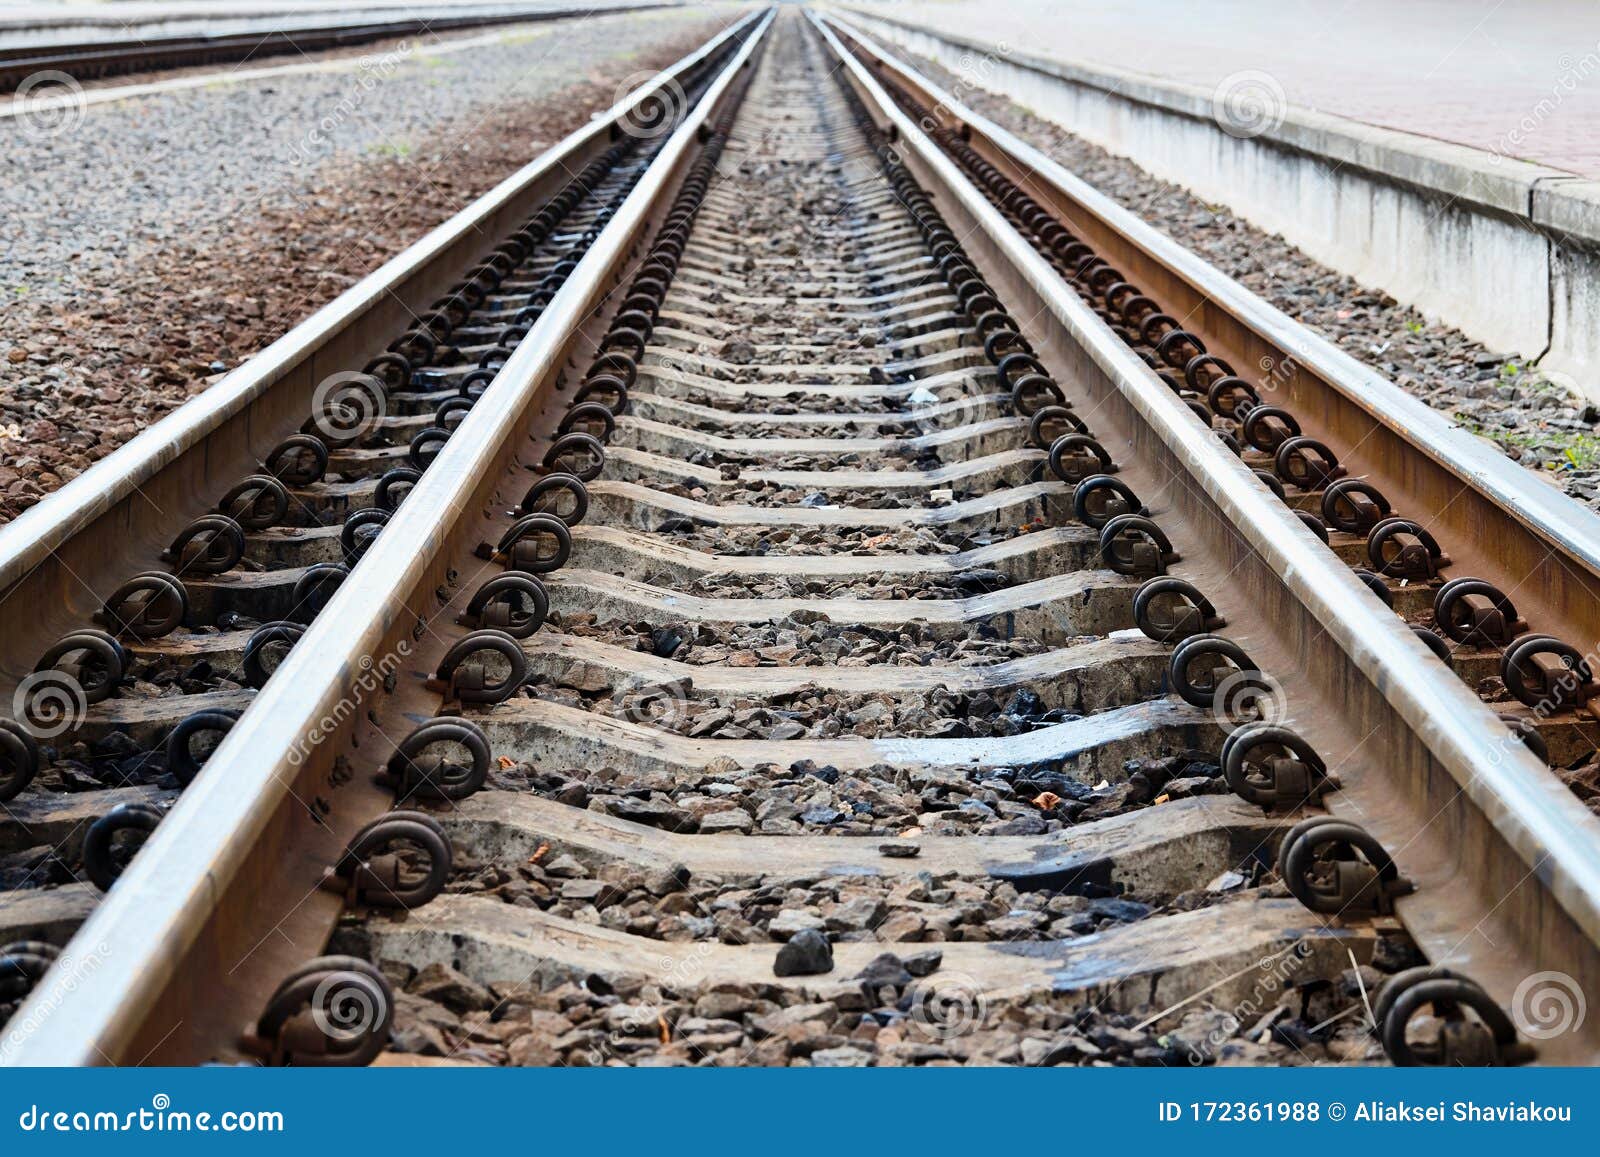 Dual Gauge Or Mixed-gauge Tracks Example Allows Passage Of Trains Of ...